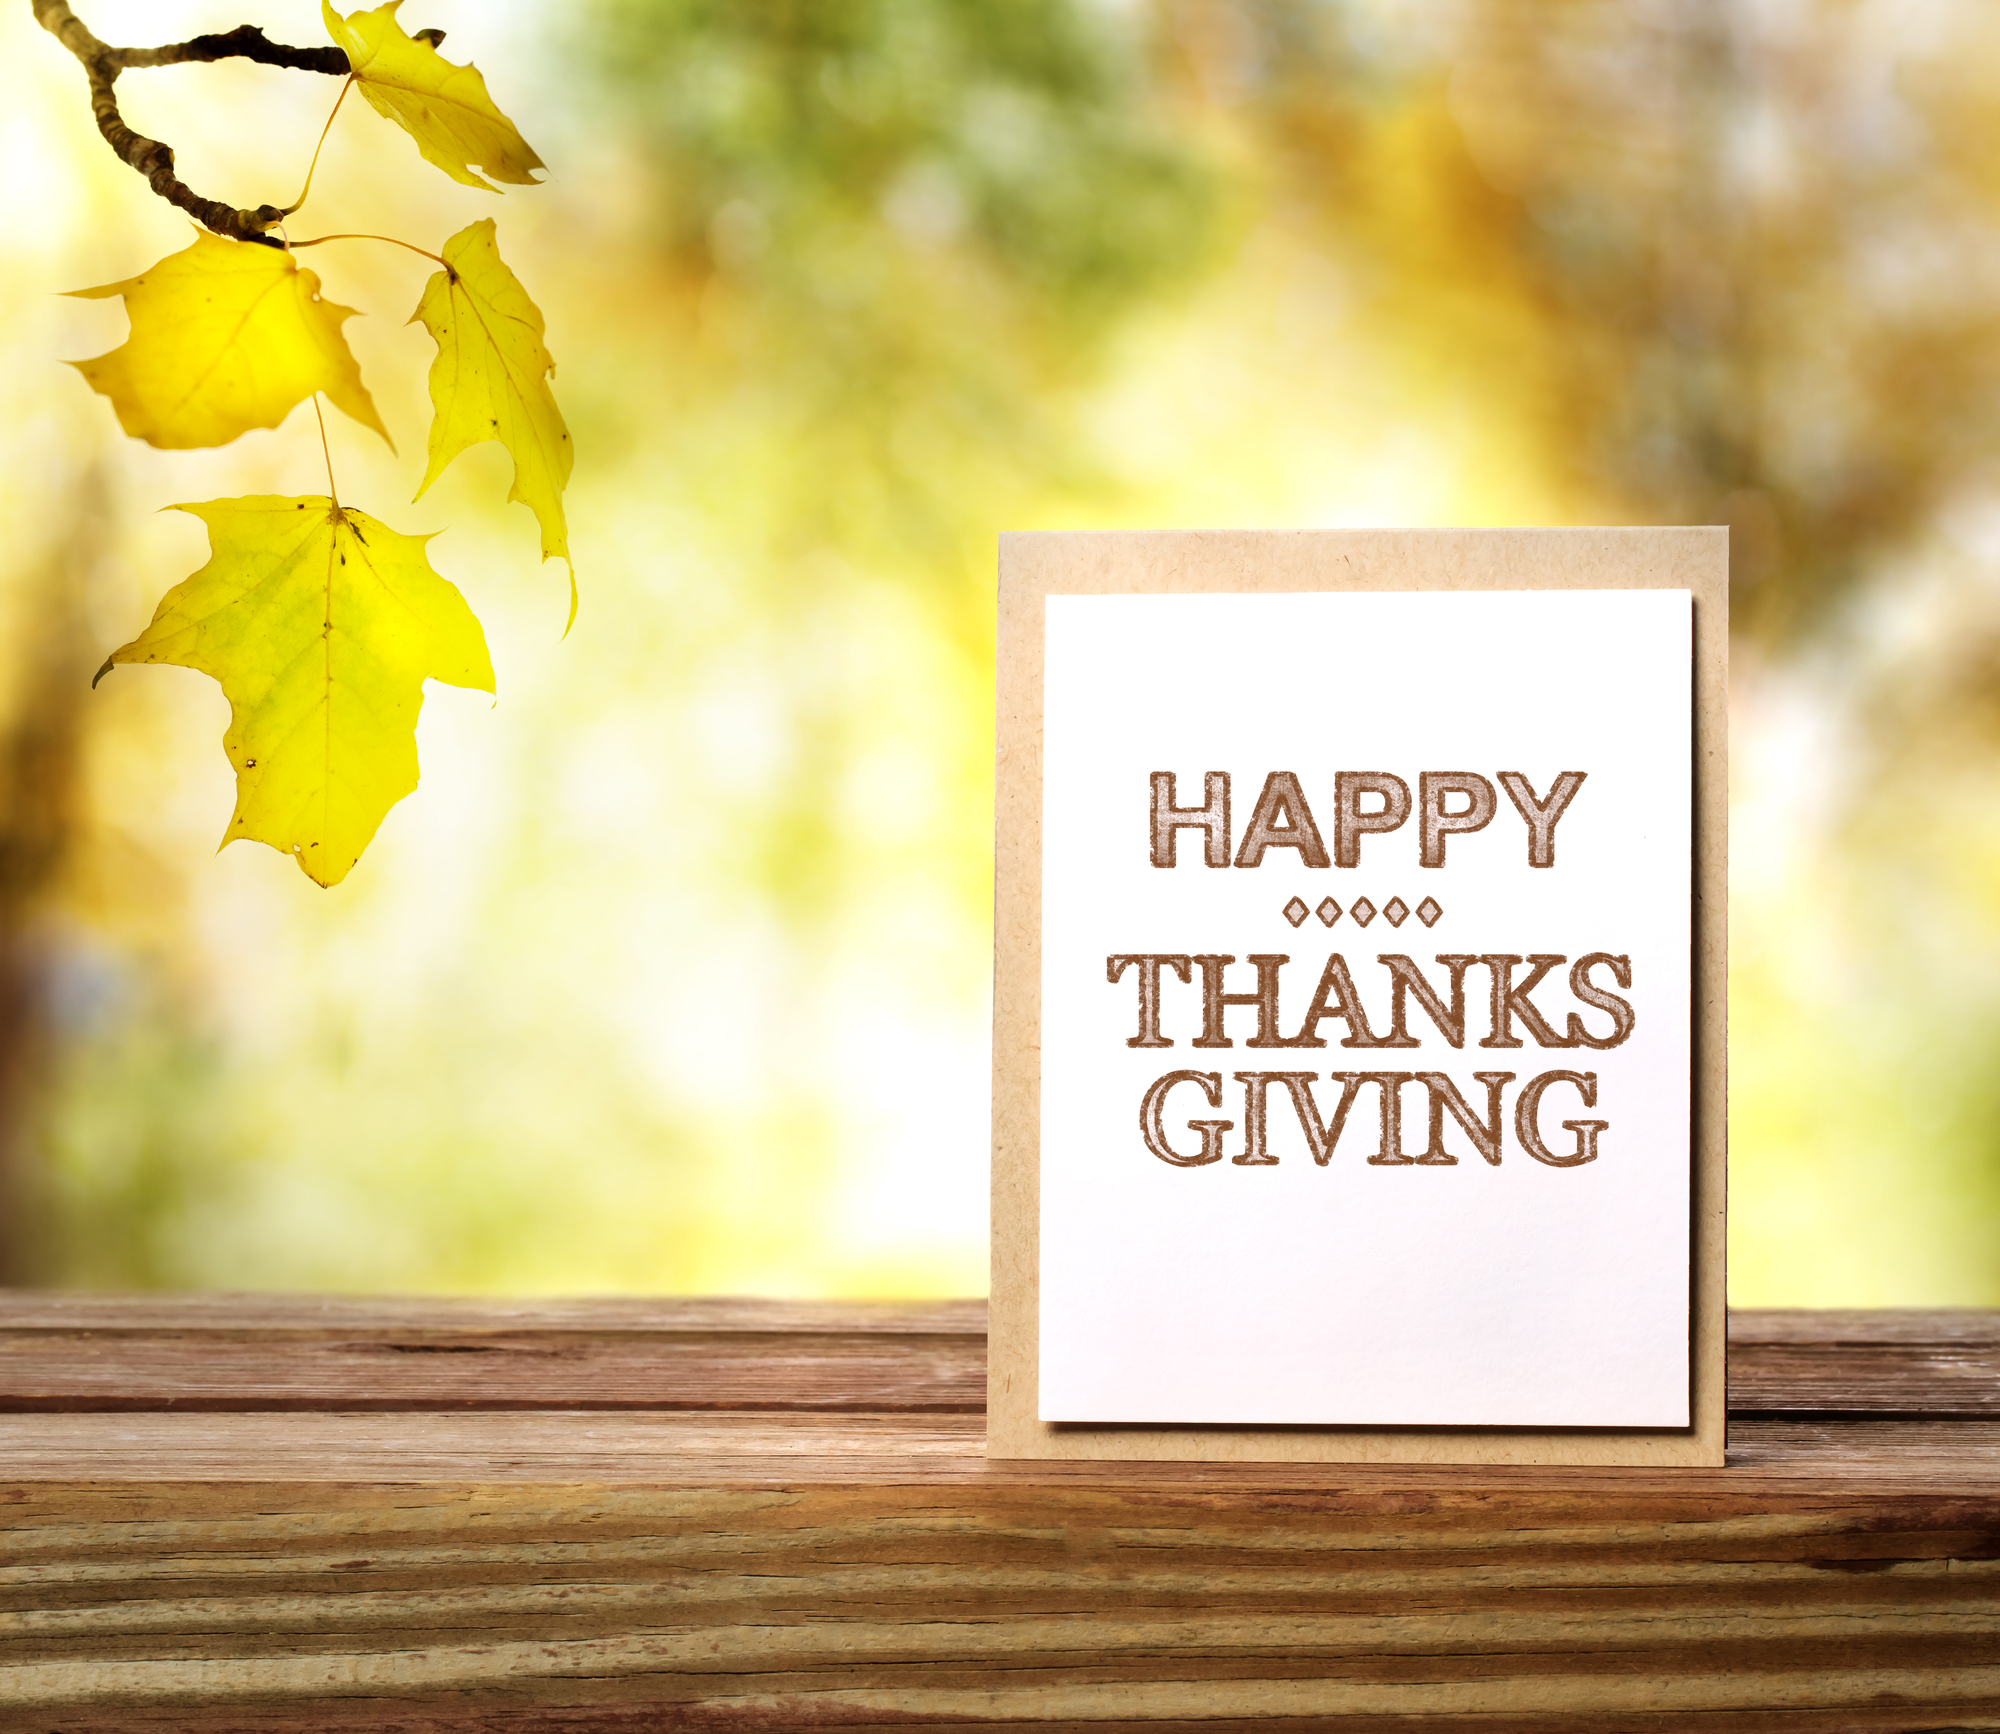 Thanks – Giving